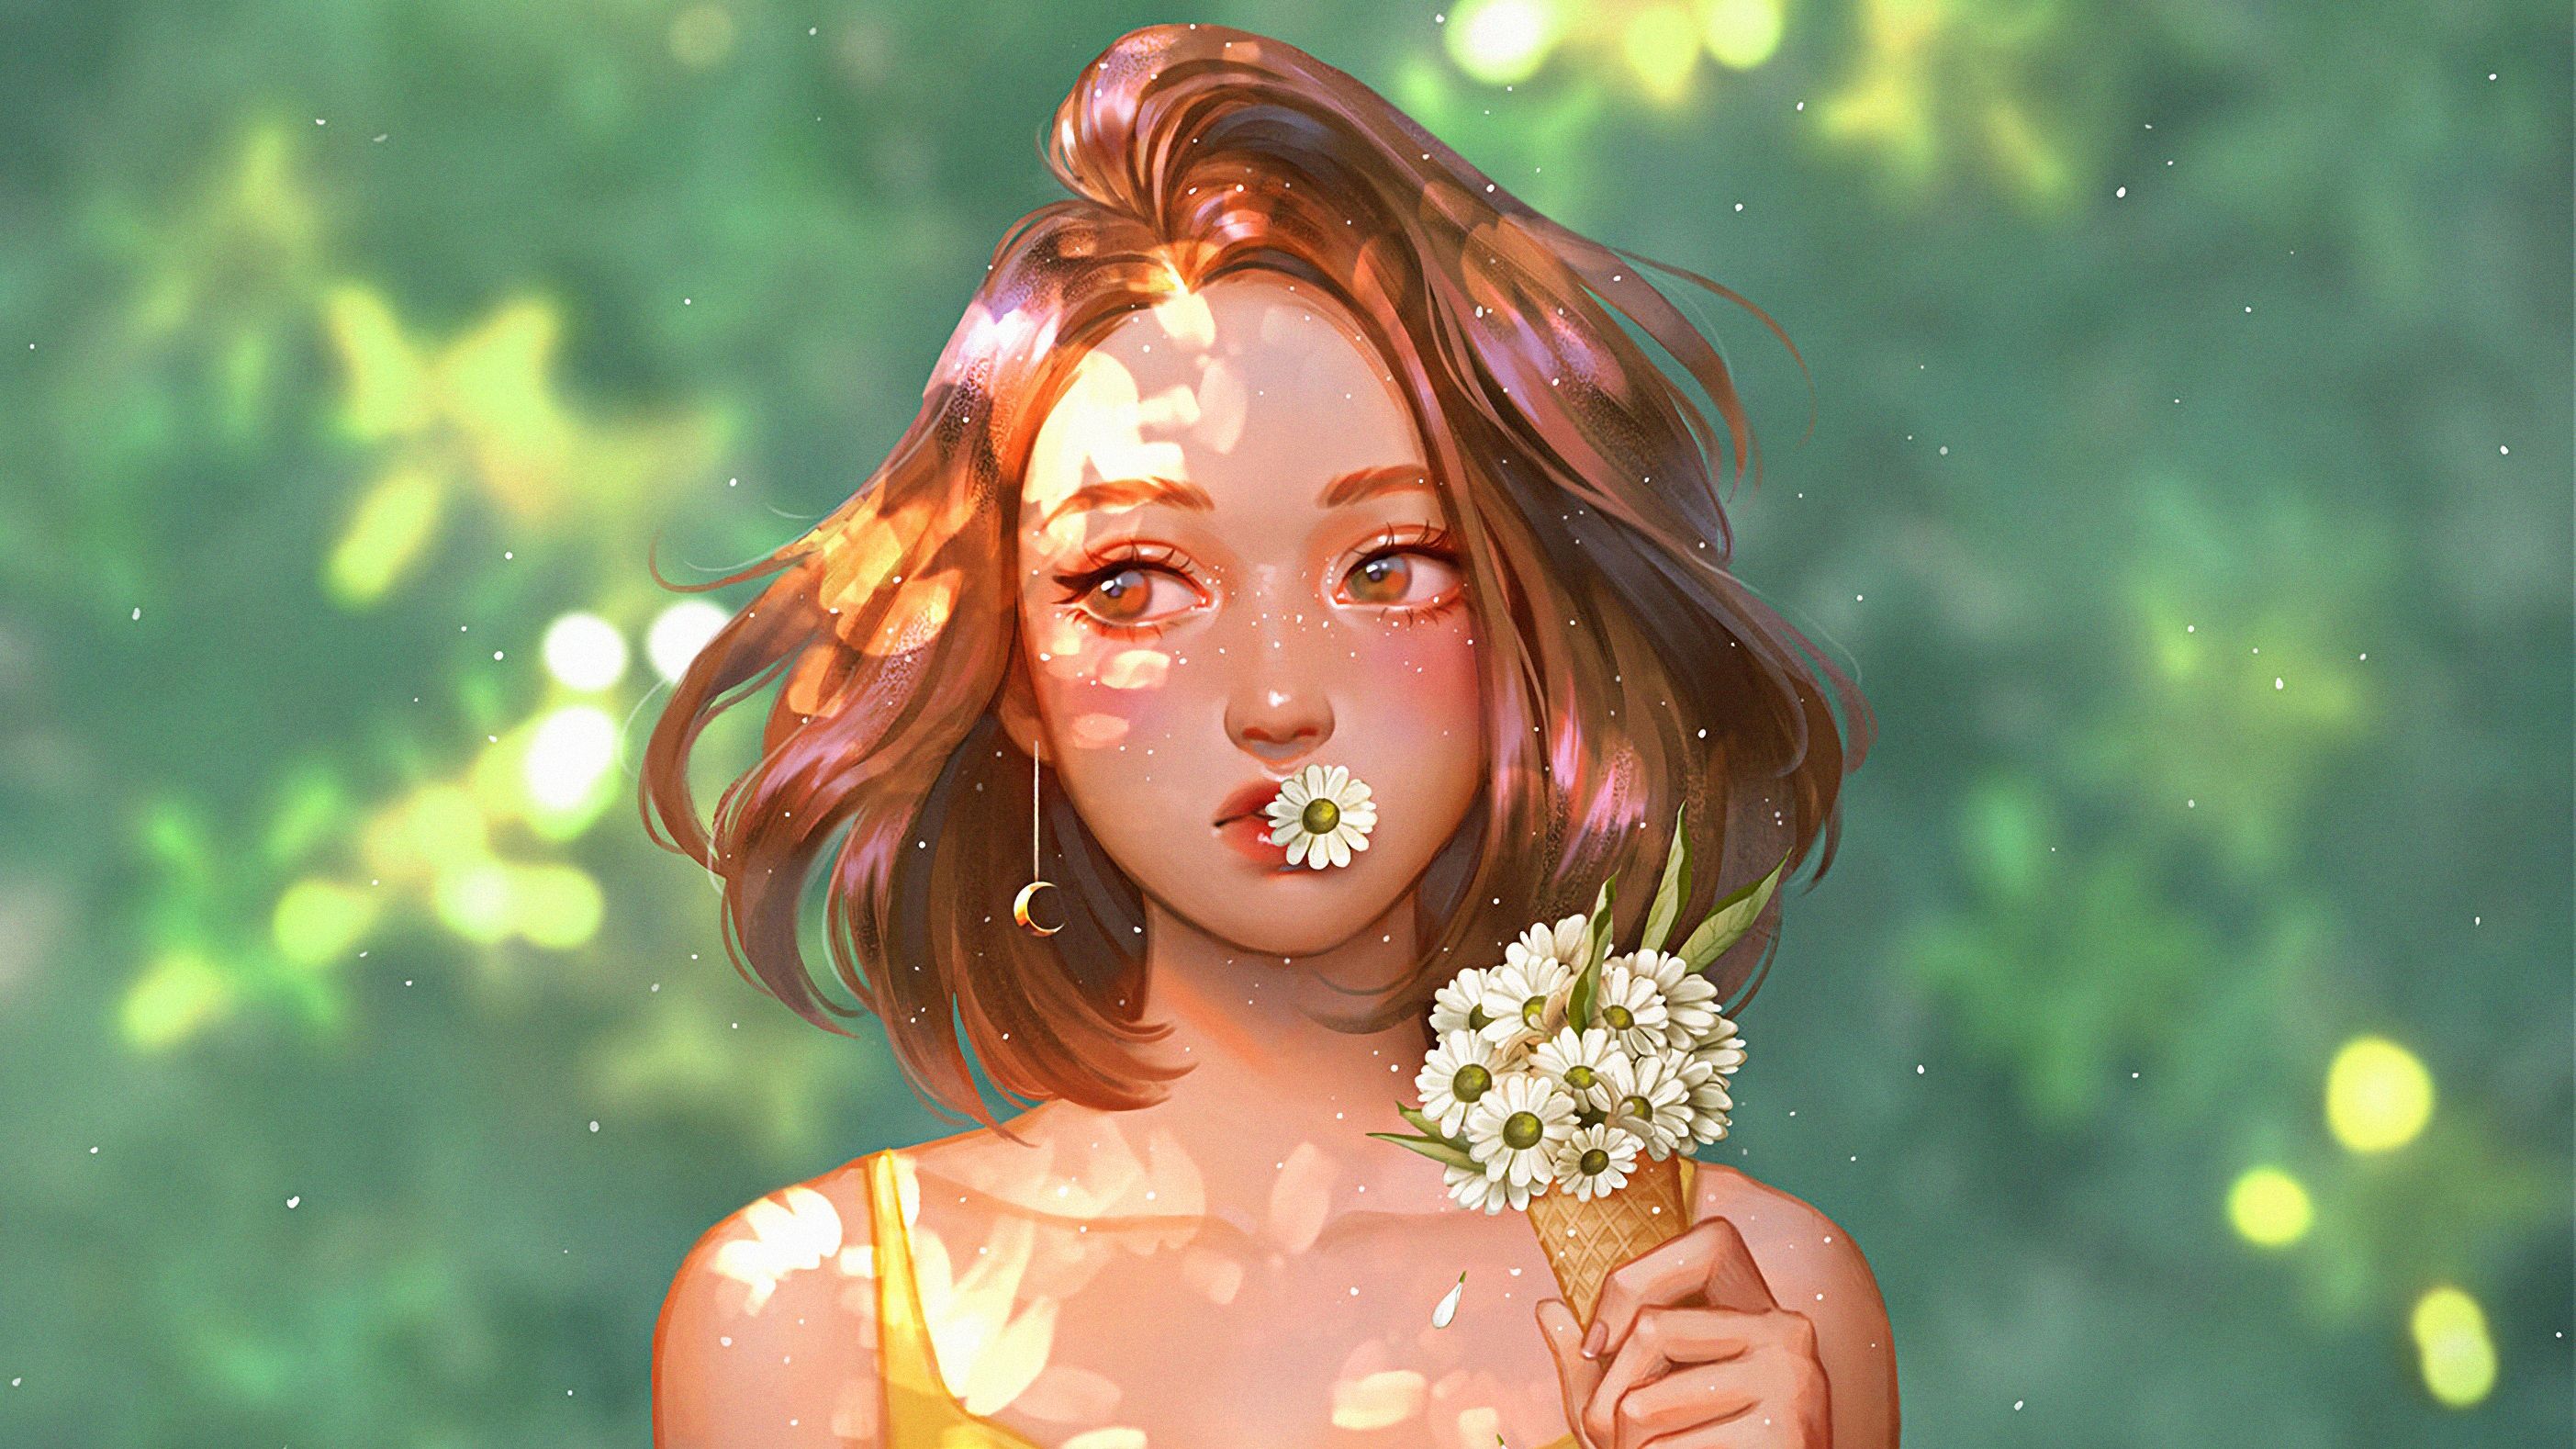 Girl With Daisy Flowers, HD Artist, 4k Wallpaper, Image, Background, Photo and Picture